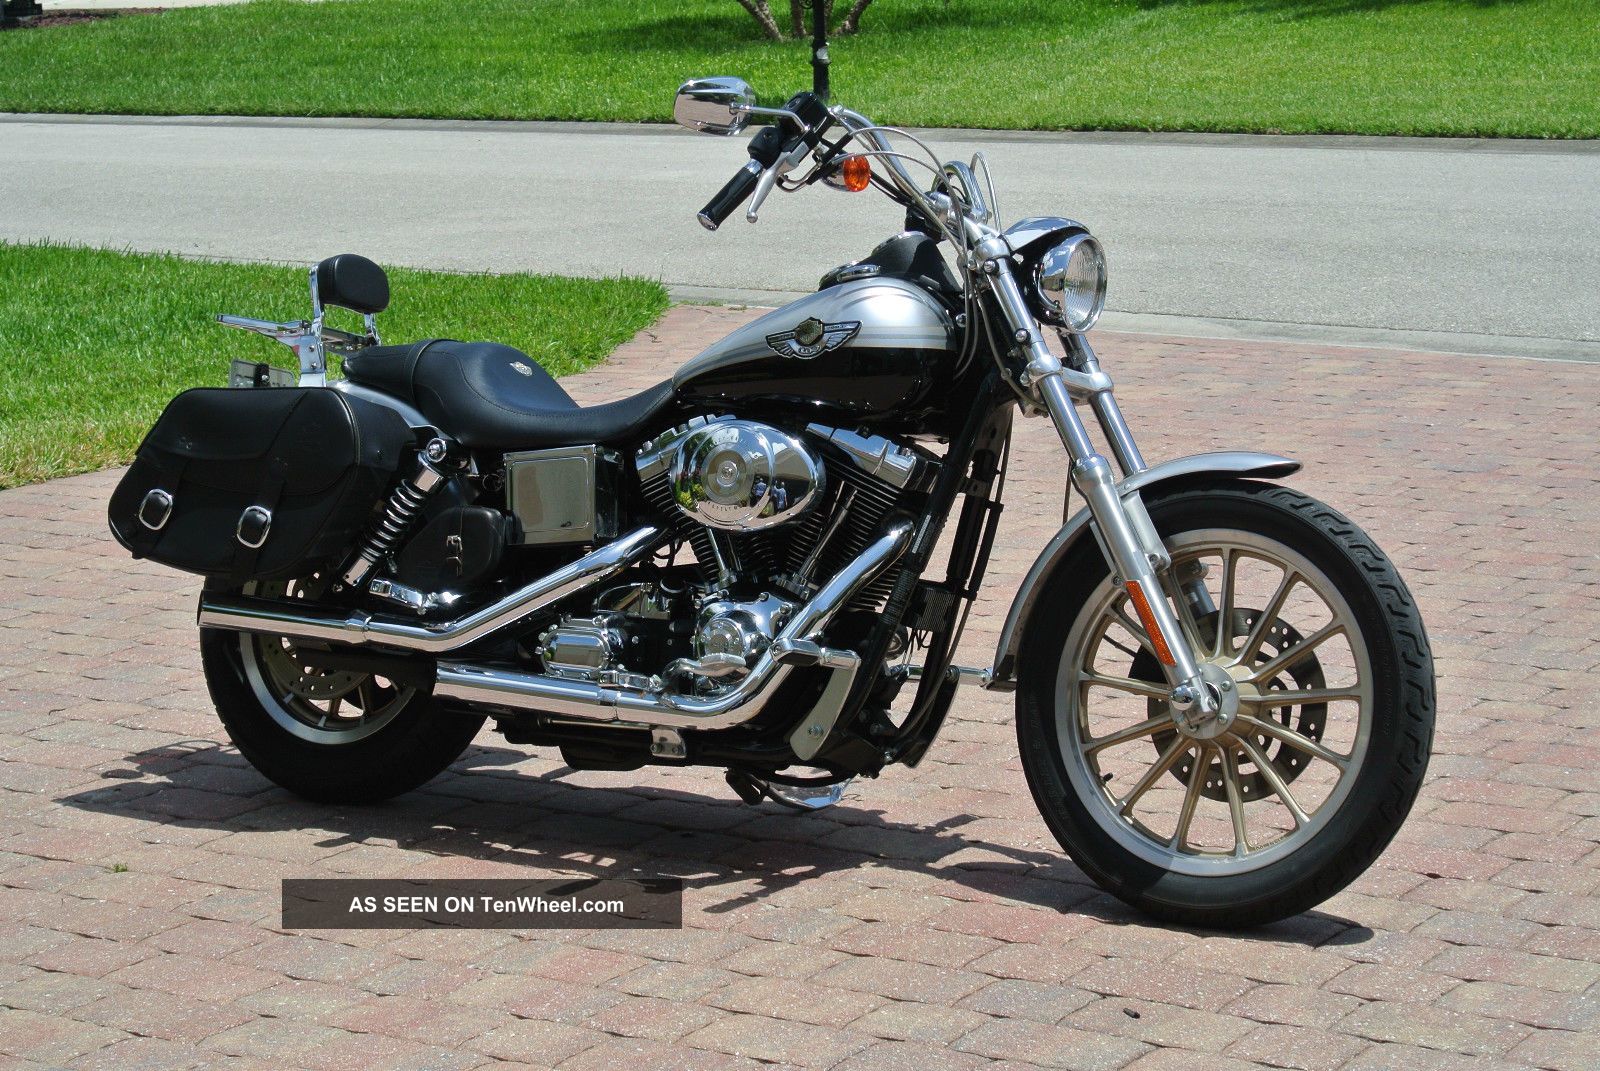 2003 Harley Davidson Dyna Low Rider 100th Anniversary Best Auto Cars Reviews